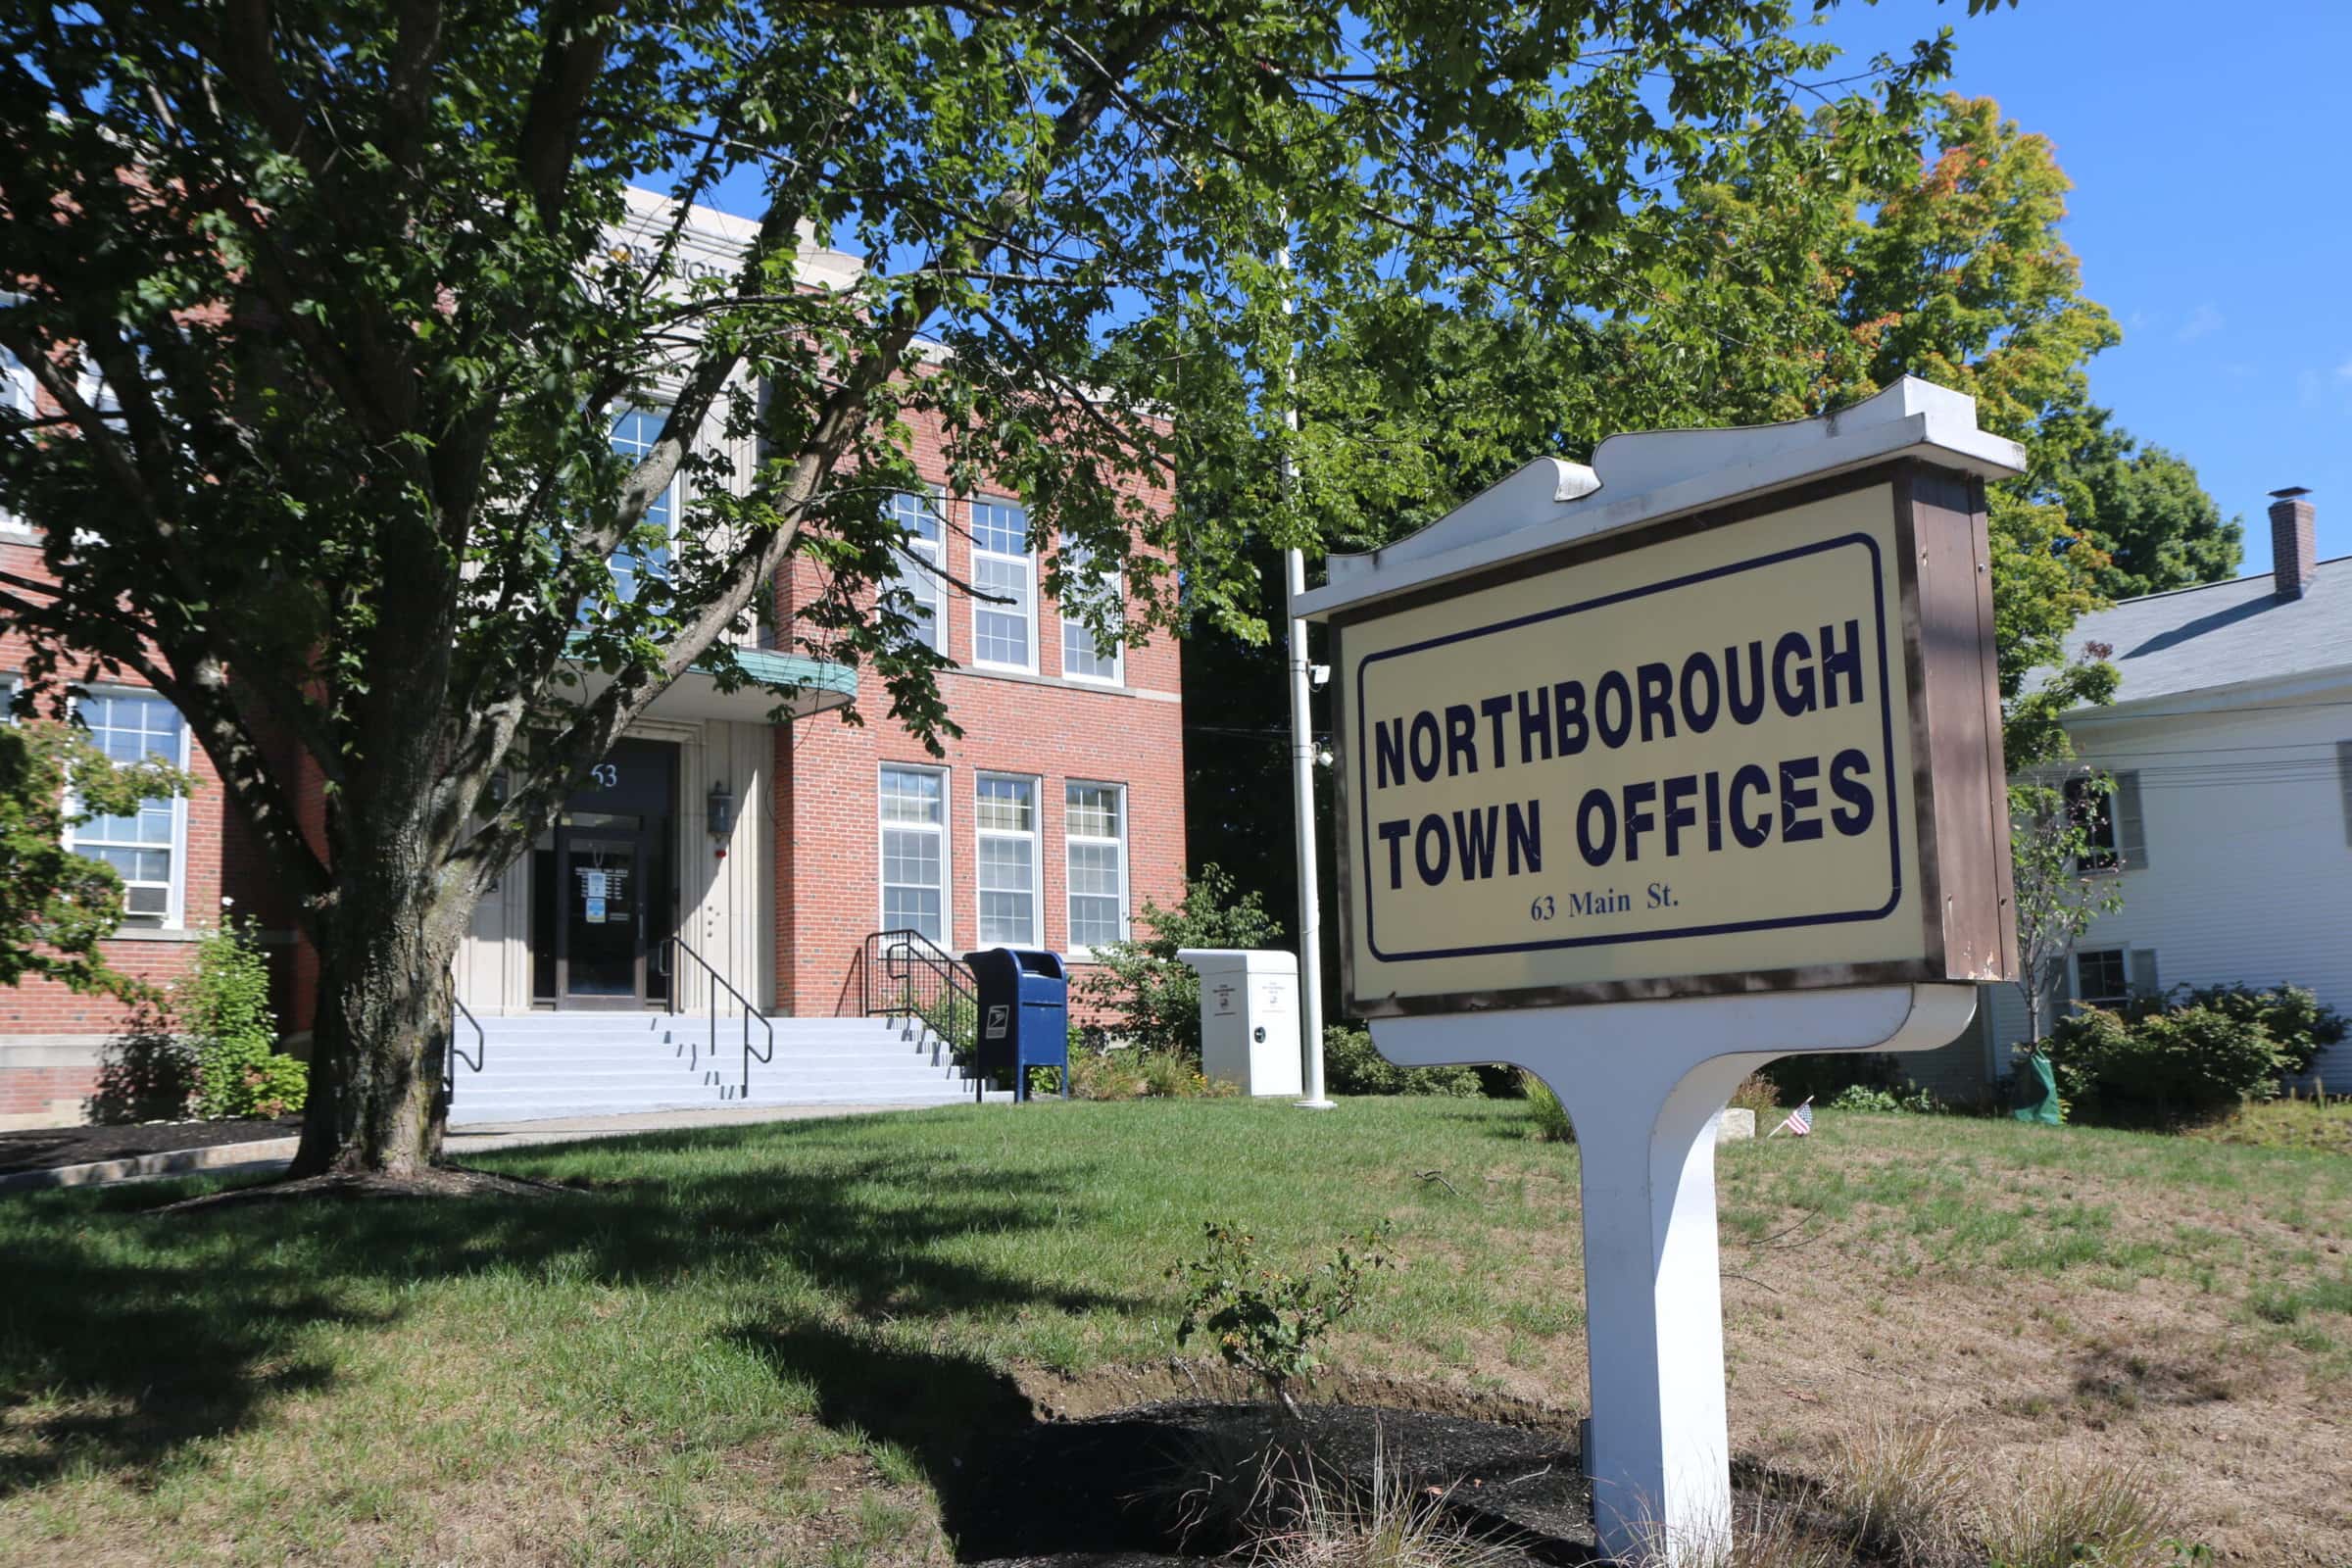 Contract approved for Northborough town administrator